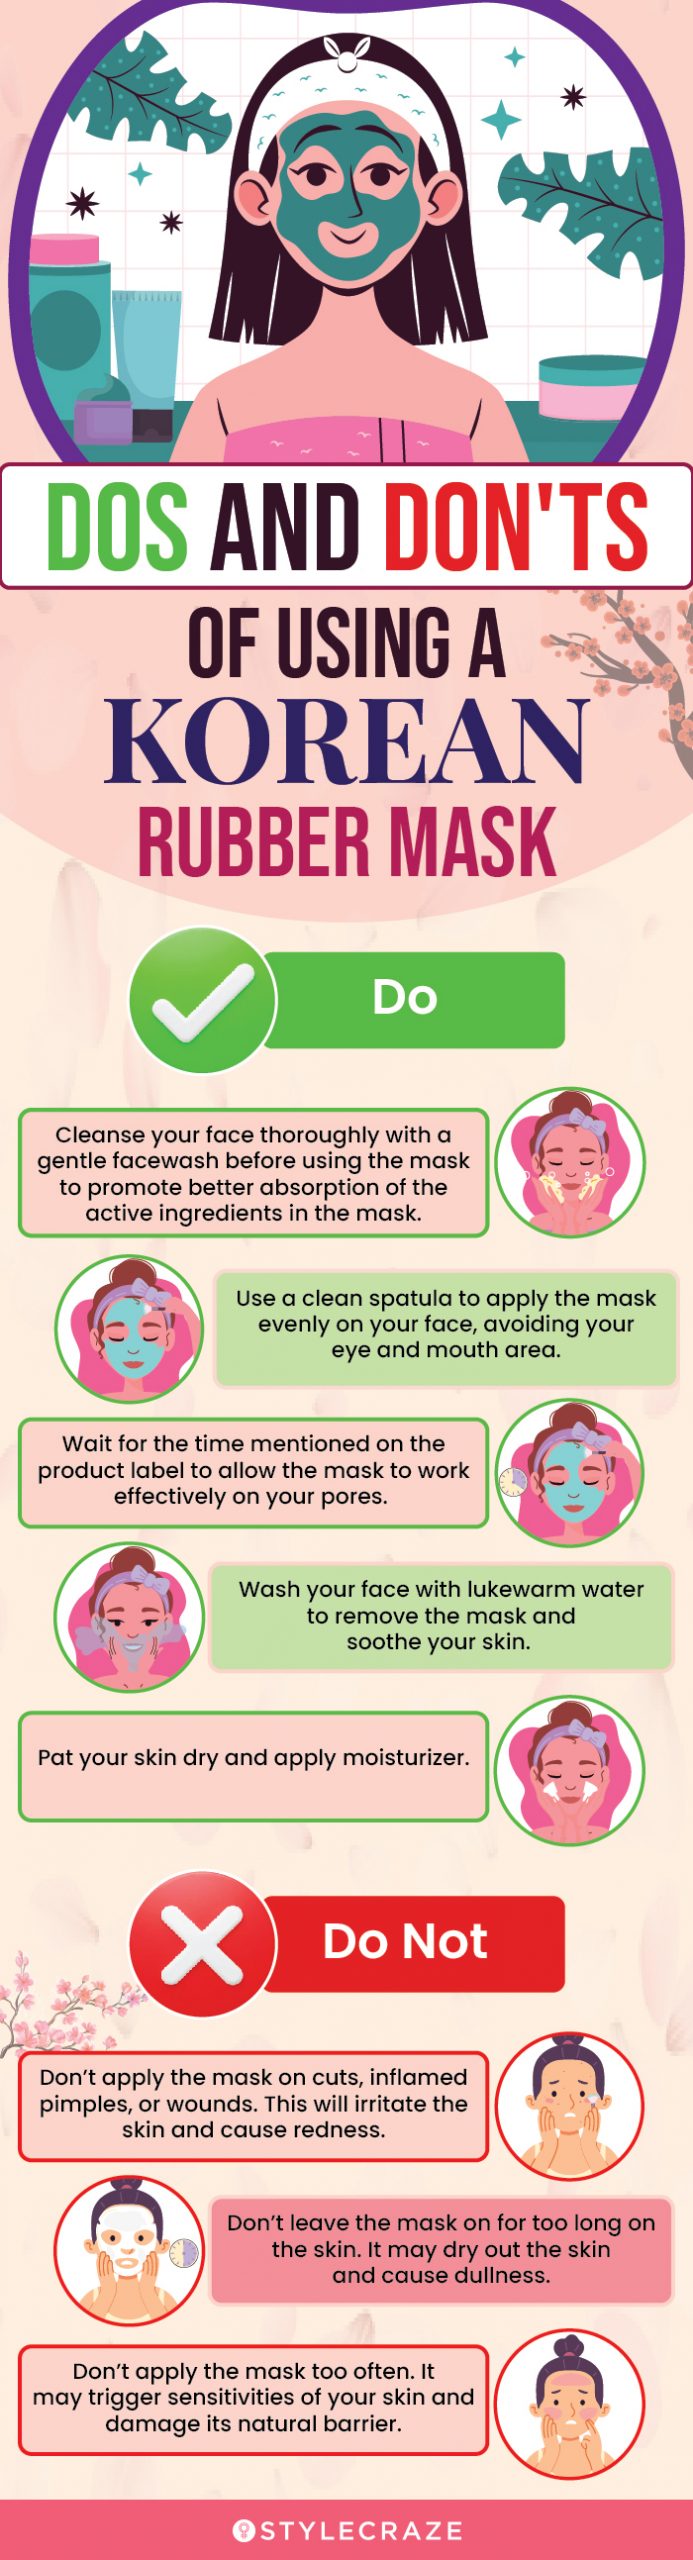 Dos And Don'ts Of Using A Korean Rubber Mask (infographic)